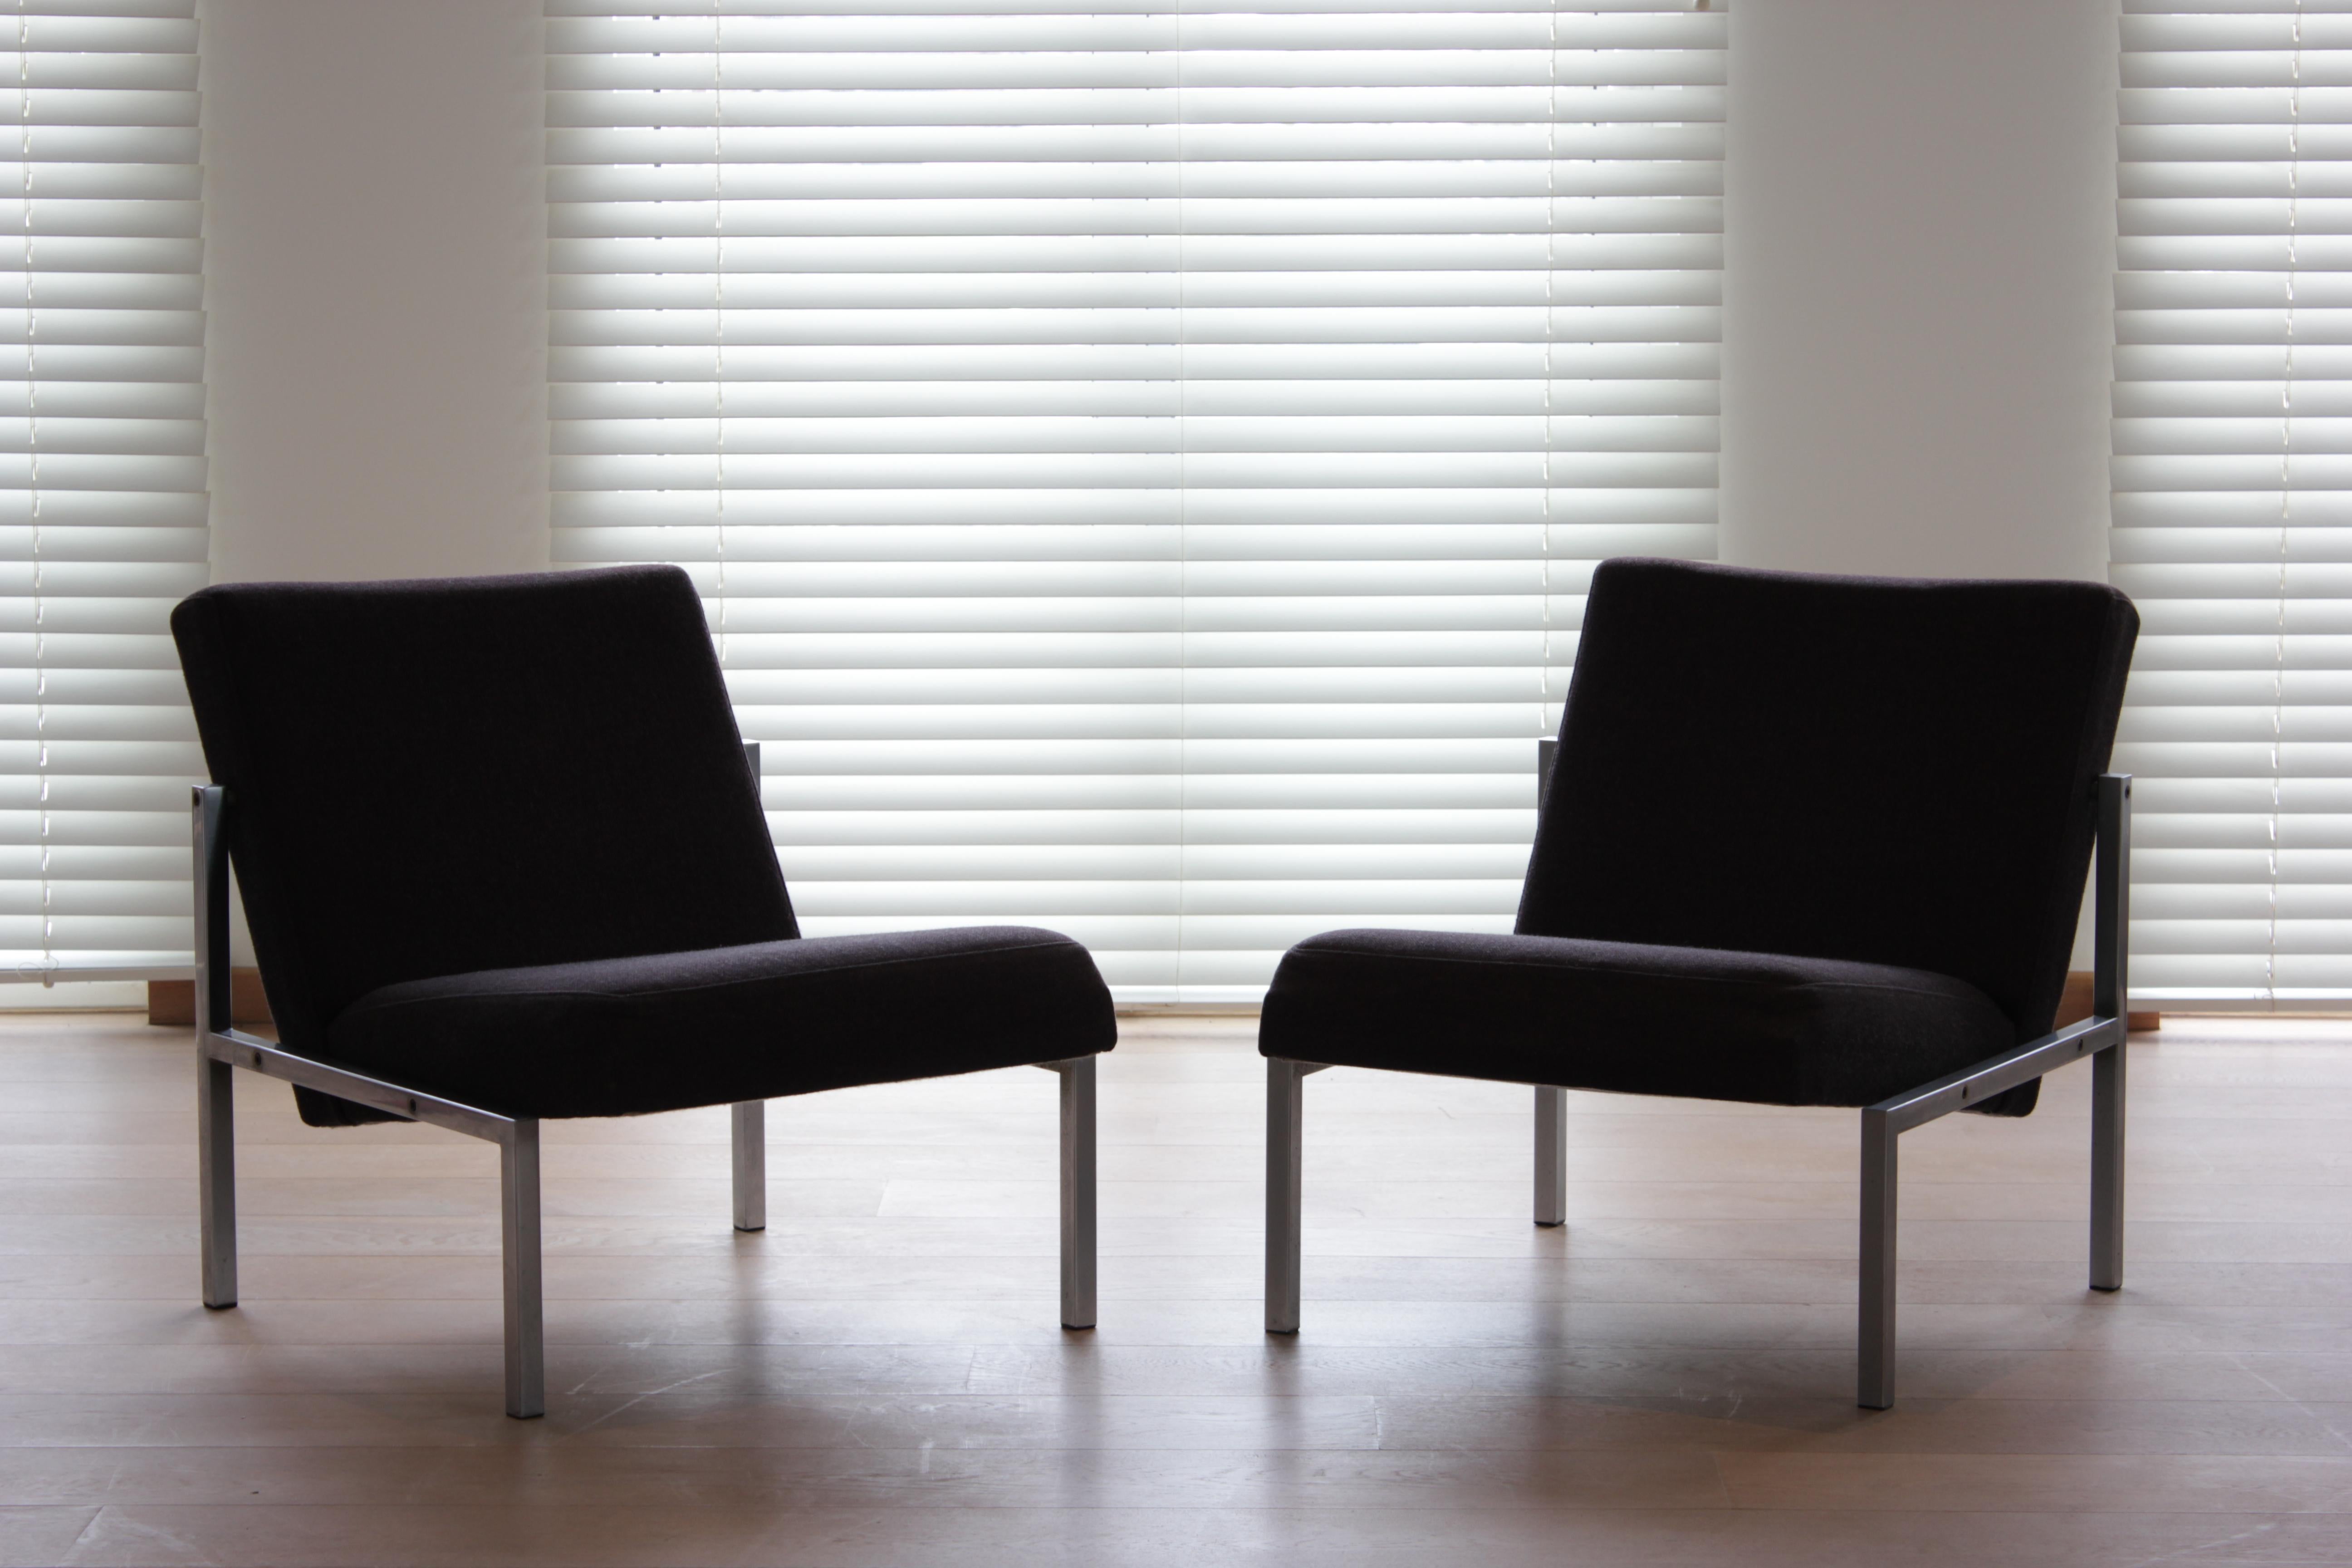 Mid-Century Modern Pair of SZ11 Lounge Chairs by Martin Visser for 't Spectrum, 1960s For Sale